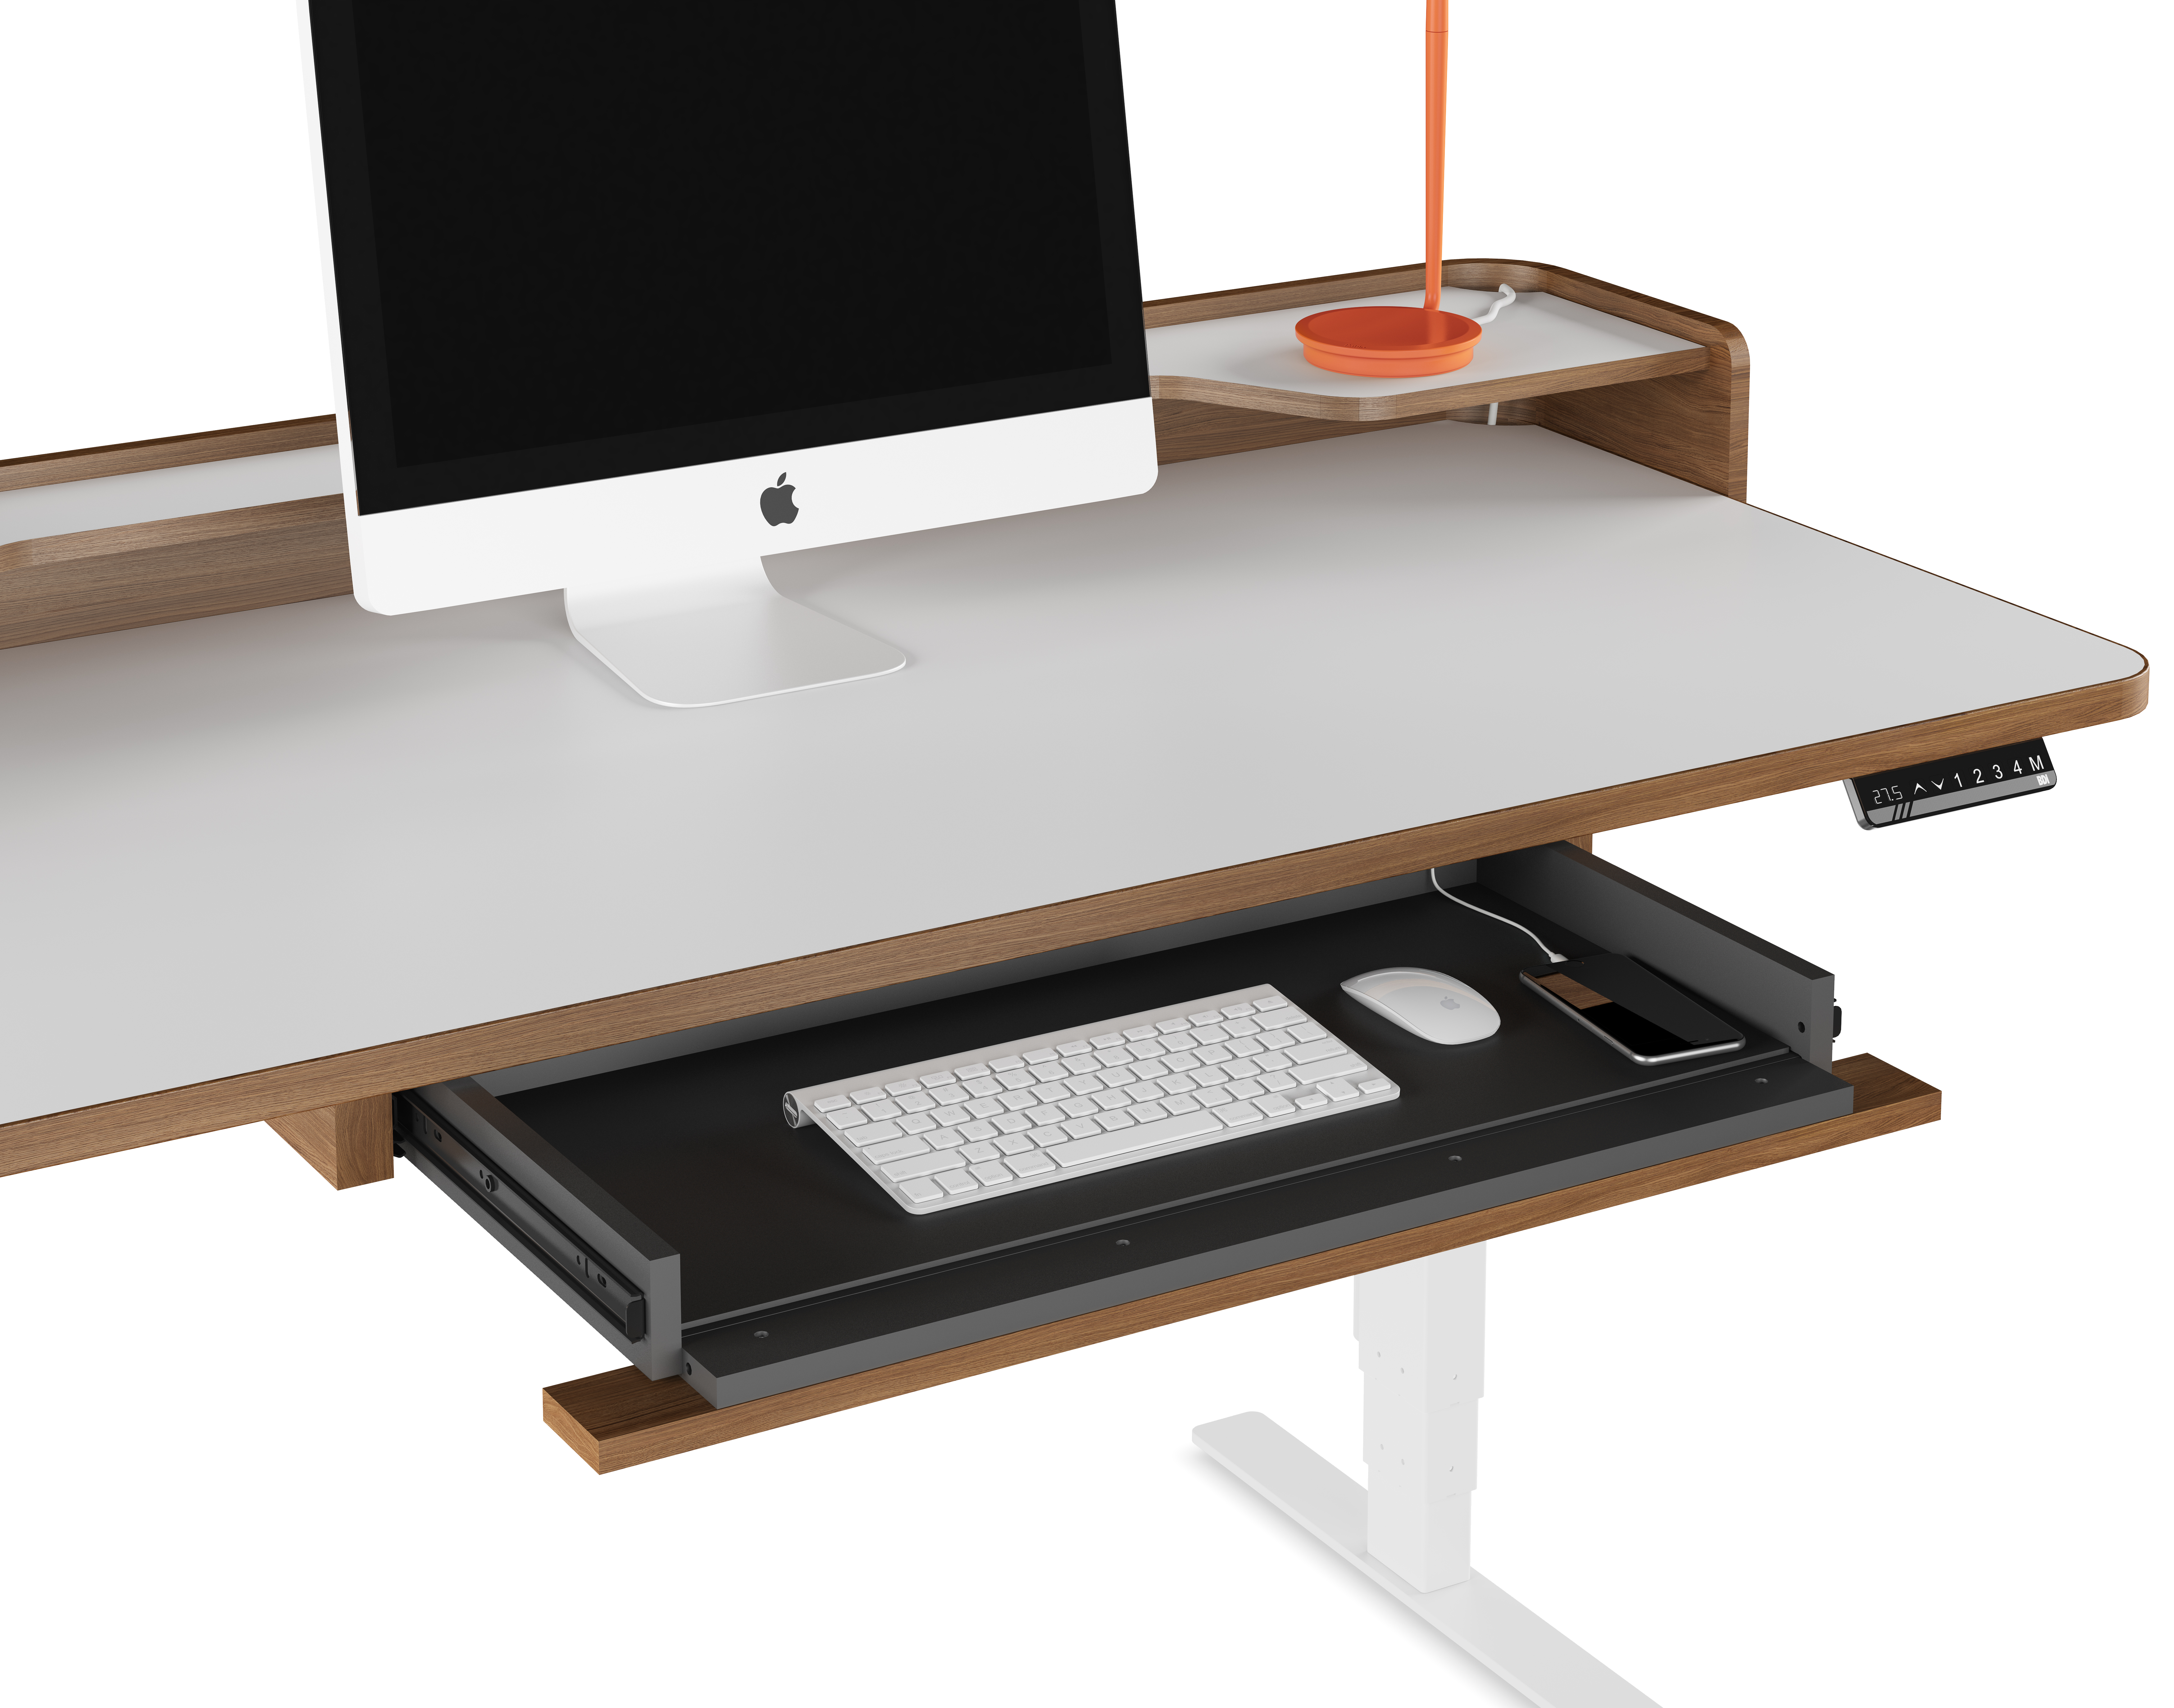 The Kronos Lift standing desk brings a little class to getting off your chair